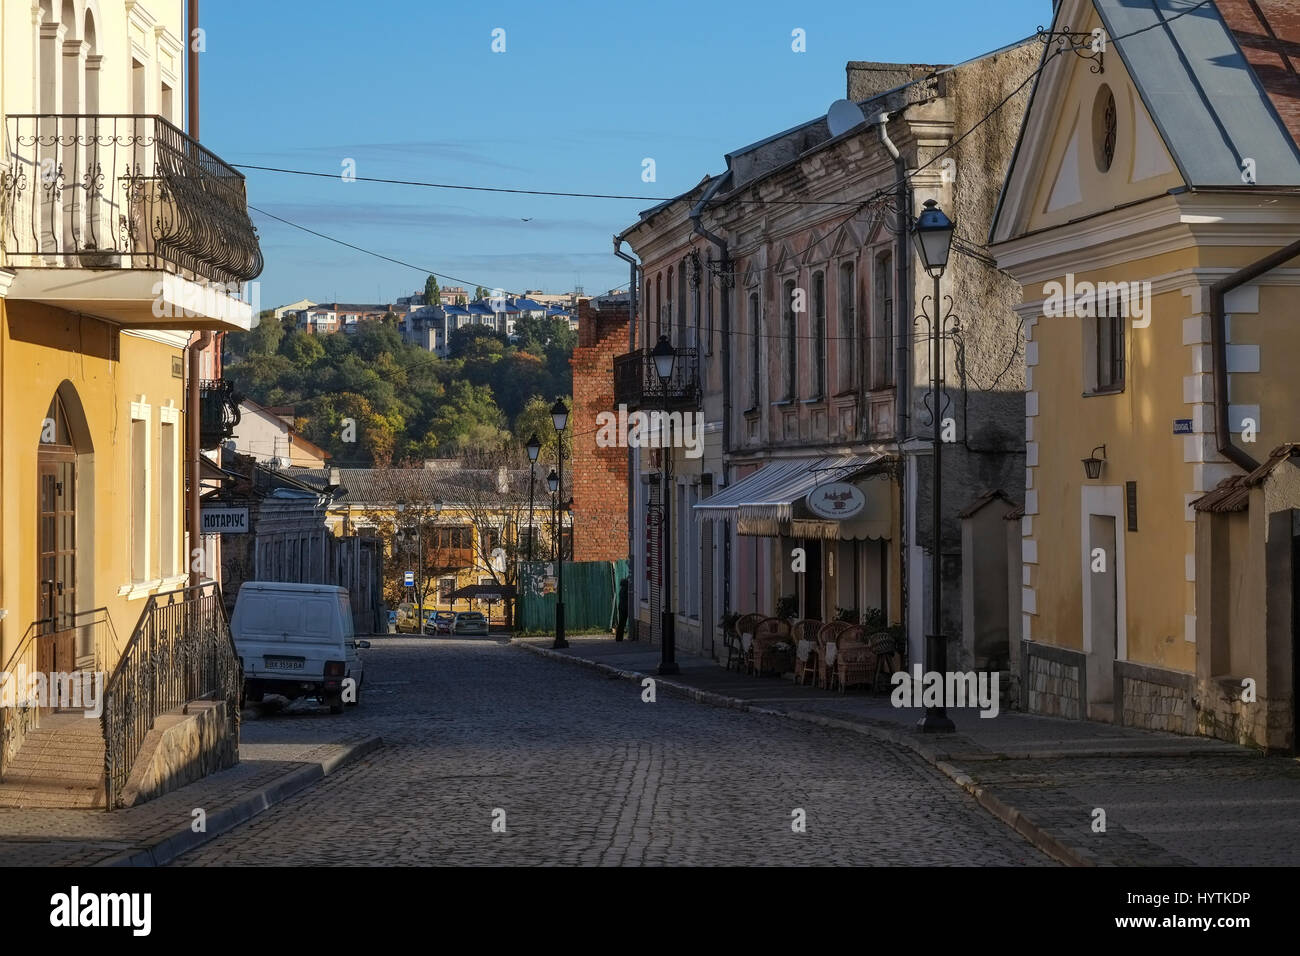 Narrow cobbled street in the old city of Kamianets-Podilski Ukraine. The city is famed for it's castle and canyon surrounding the old town Stock Photo